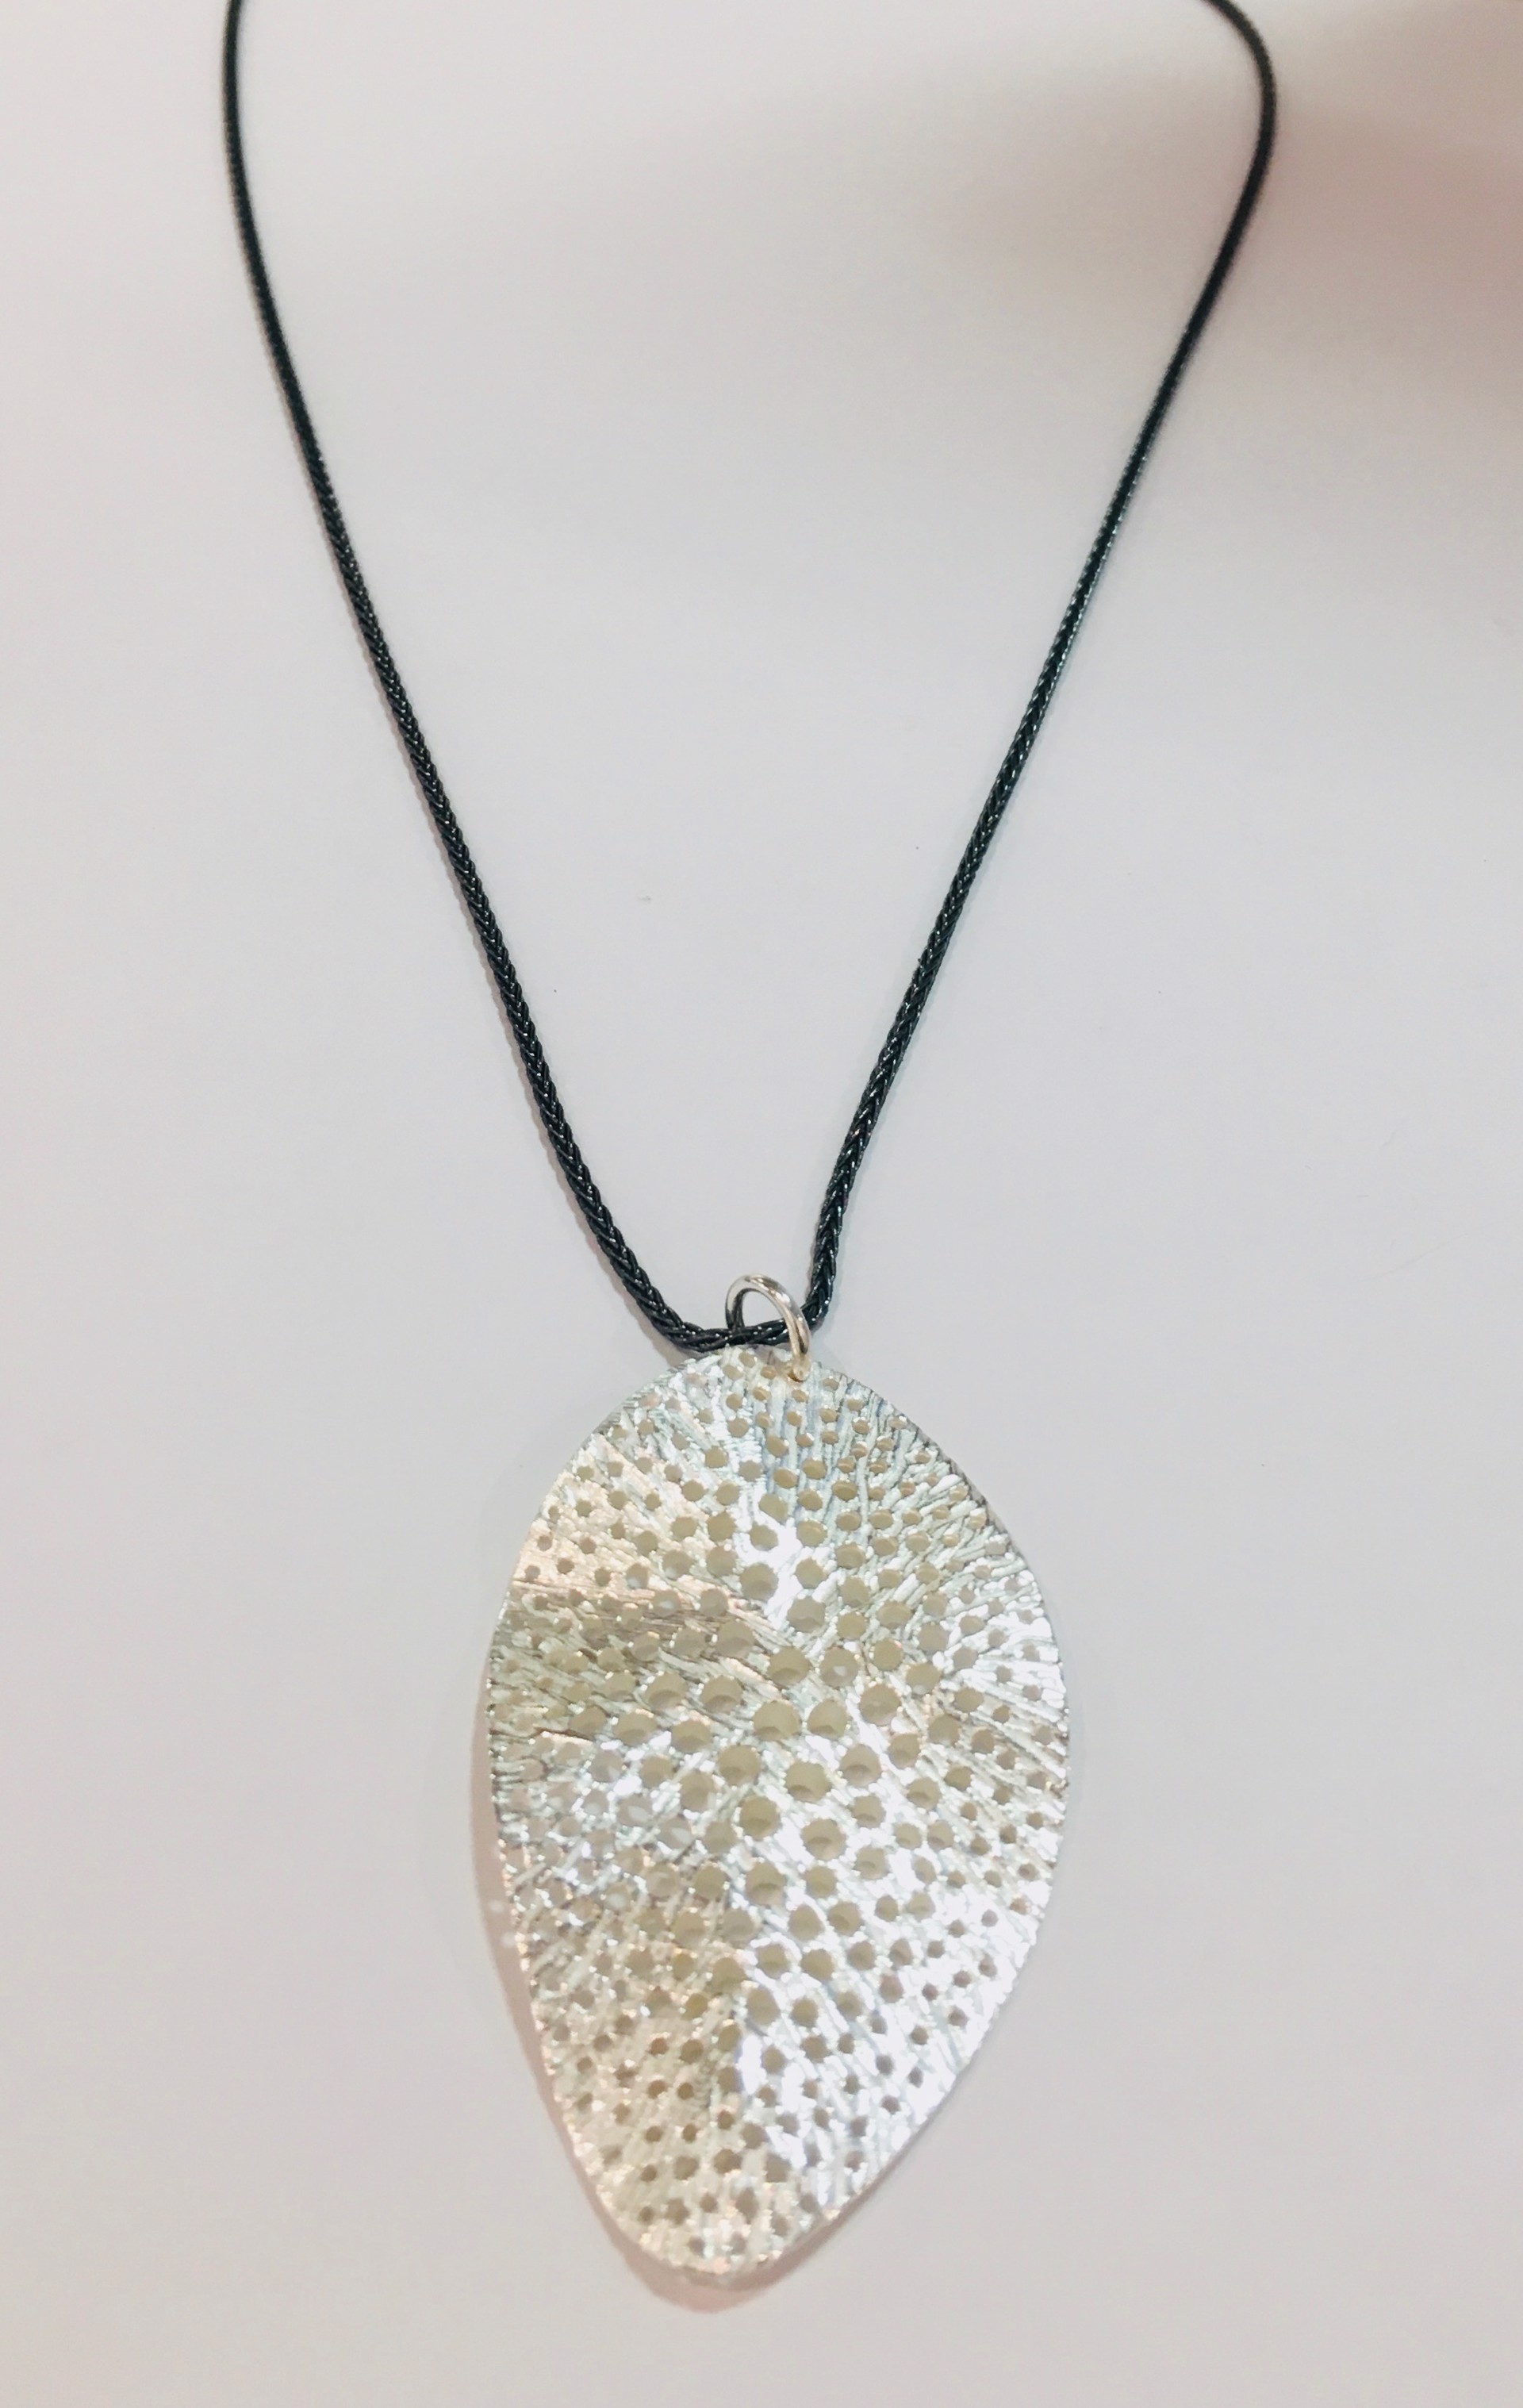 large ss pendant with holes by DAHLIA KANNER